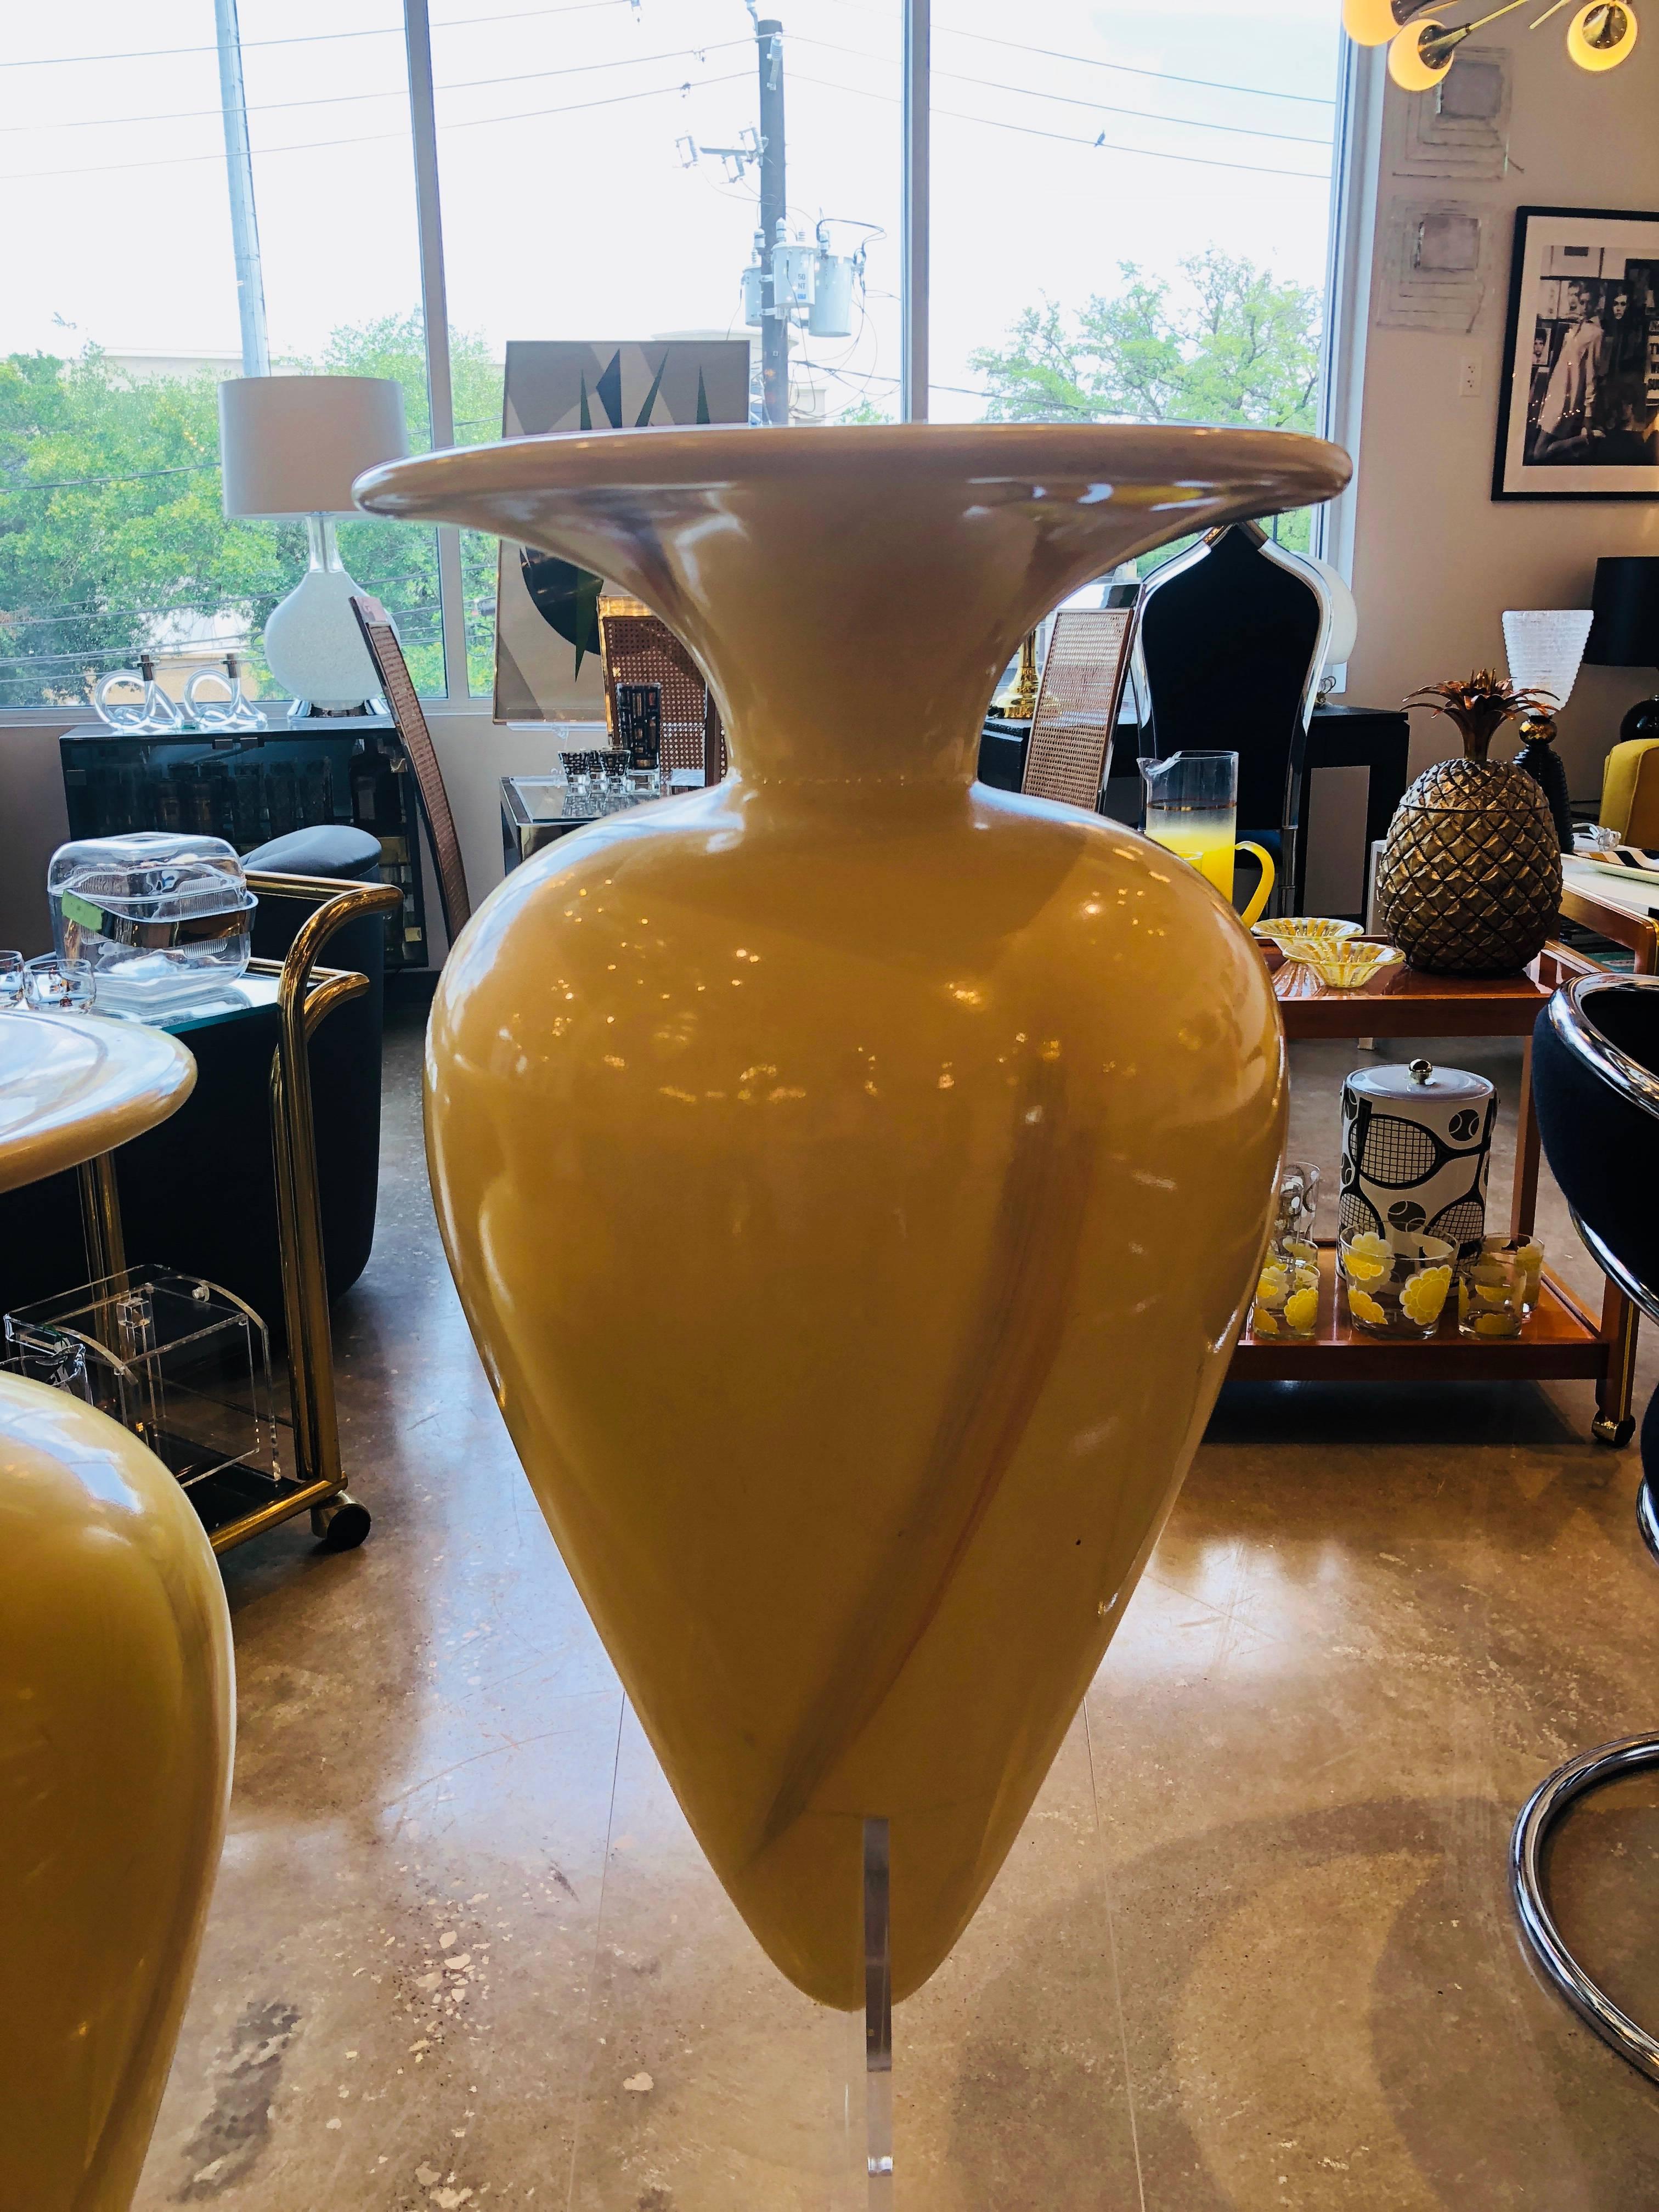 Offered are two matching late 20th century, 1980s-1990s oversized decorative fiberglass floor urns on Lucite bases. The modern however elegant have a buttercream base color with light broad brushstrokes of light pink and light blue. Both urns sit